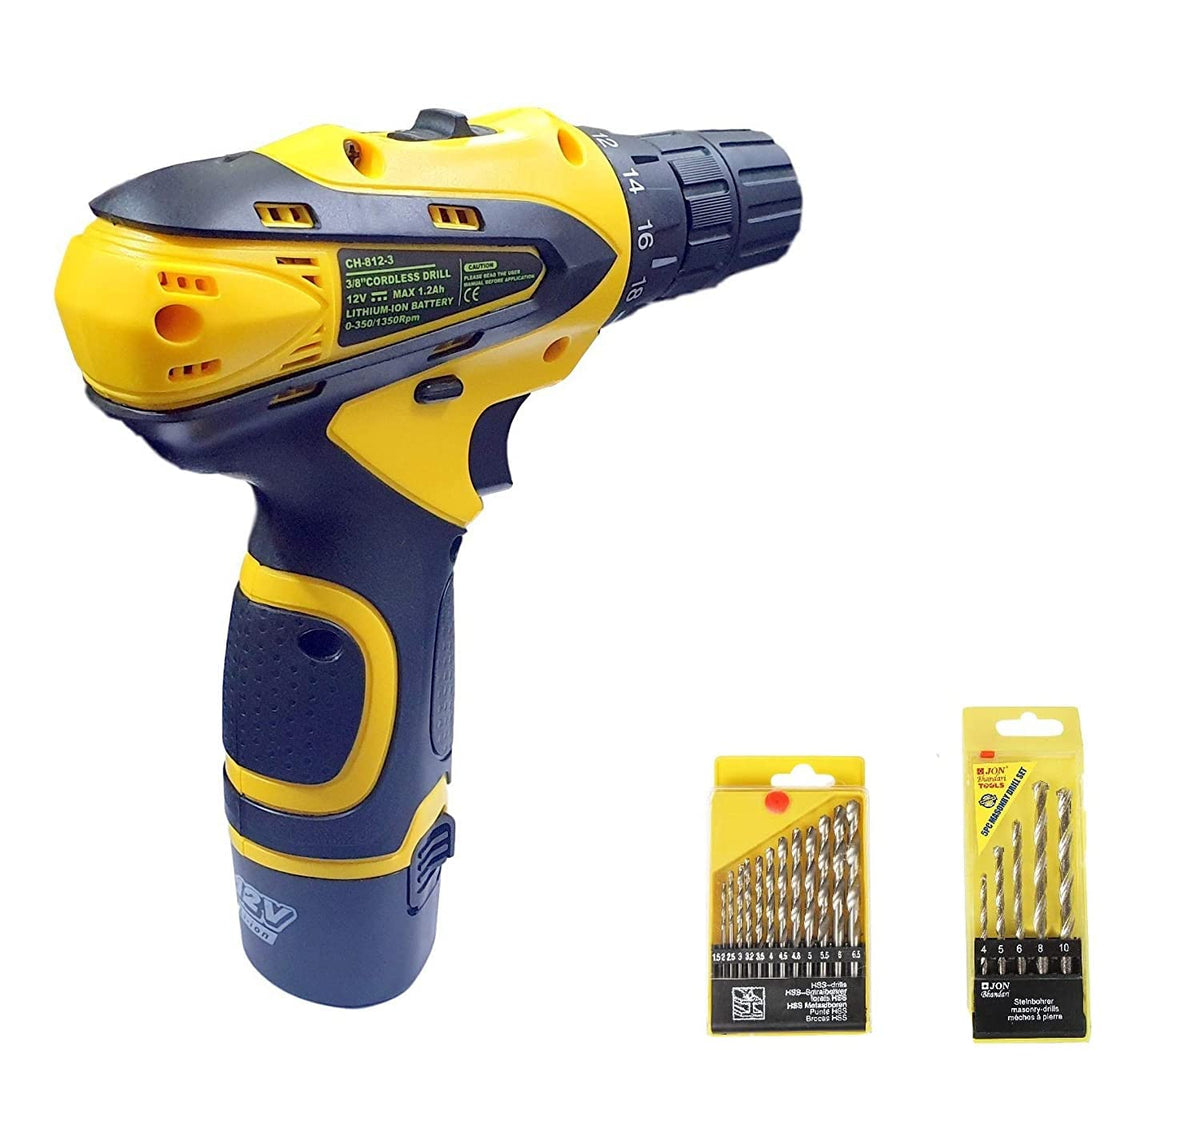 Cheston 10 mm Keyless Chuck 12V Cordless Drill/Screwdriver with 2 Batteries, 5 Wall, 13 HSS Wood bits Variable Dual Speed and Torque Setting (19 and 1, Yellow)